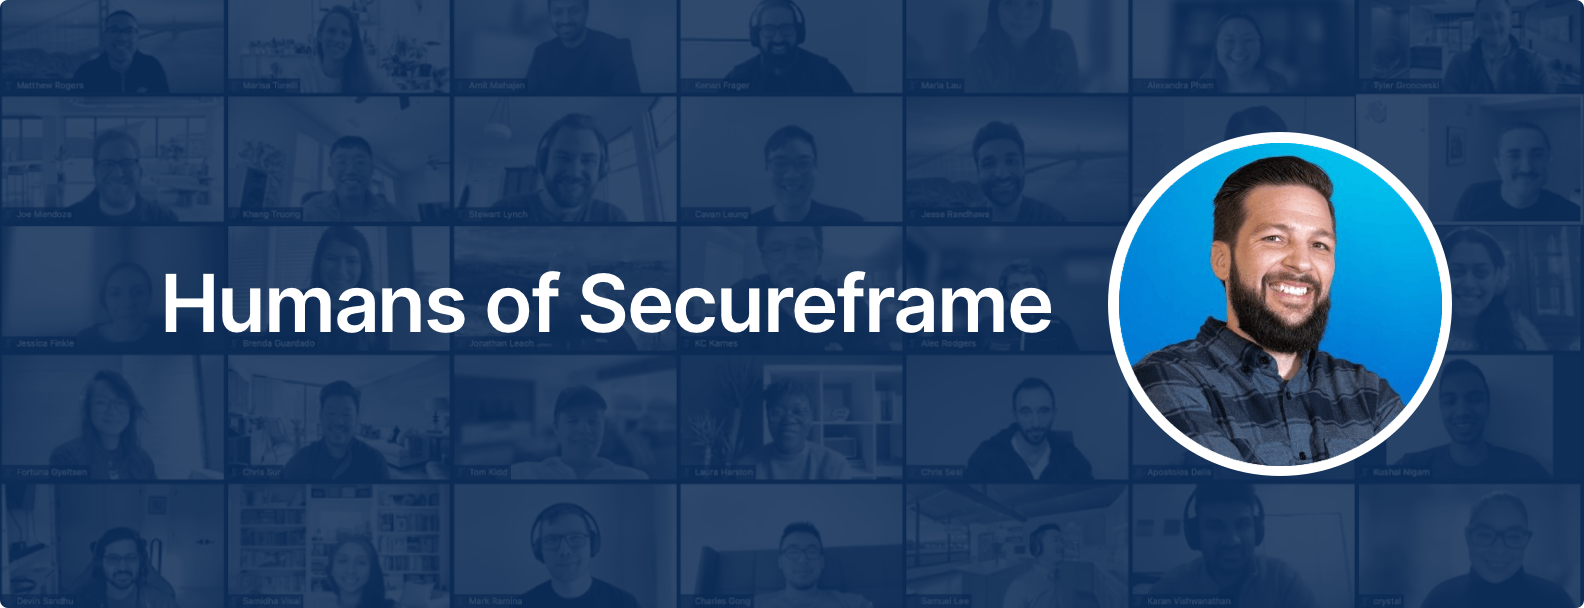 Humans of Secureframe: Head of Talent Jamey Iaccino on Agile Recruiting for High-Velocity Growth